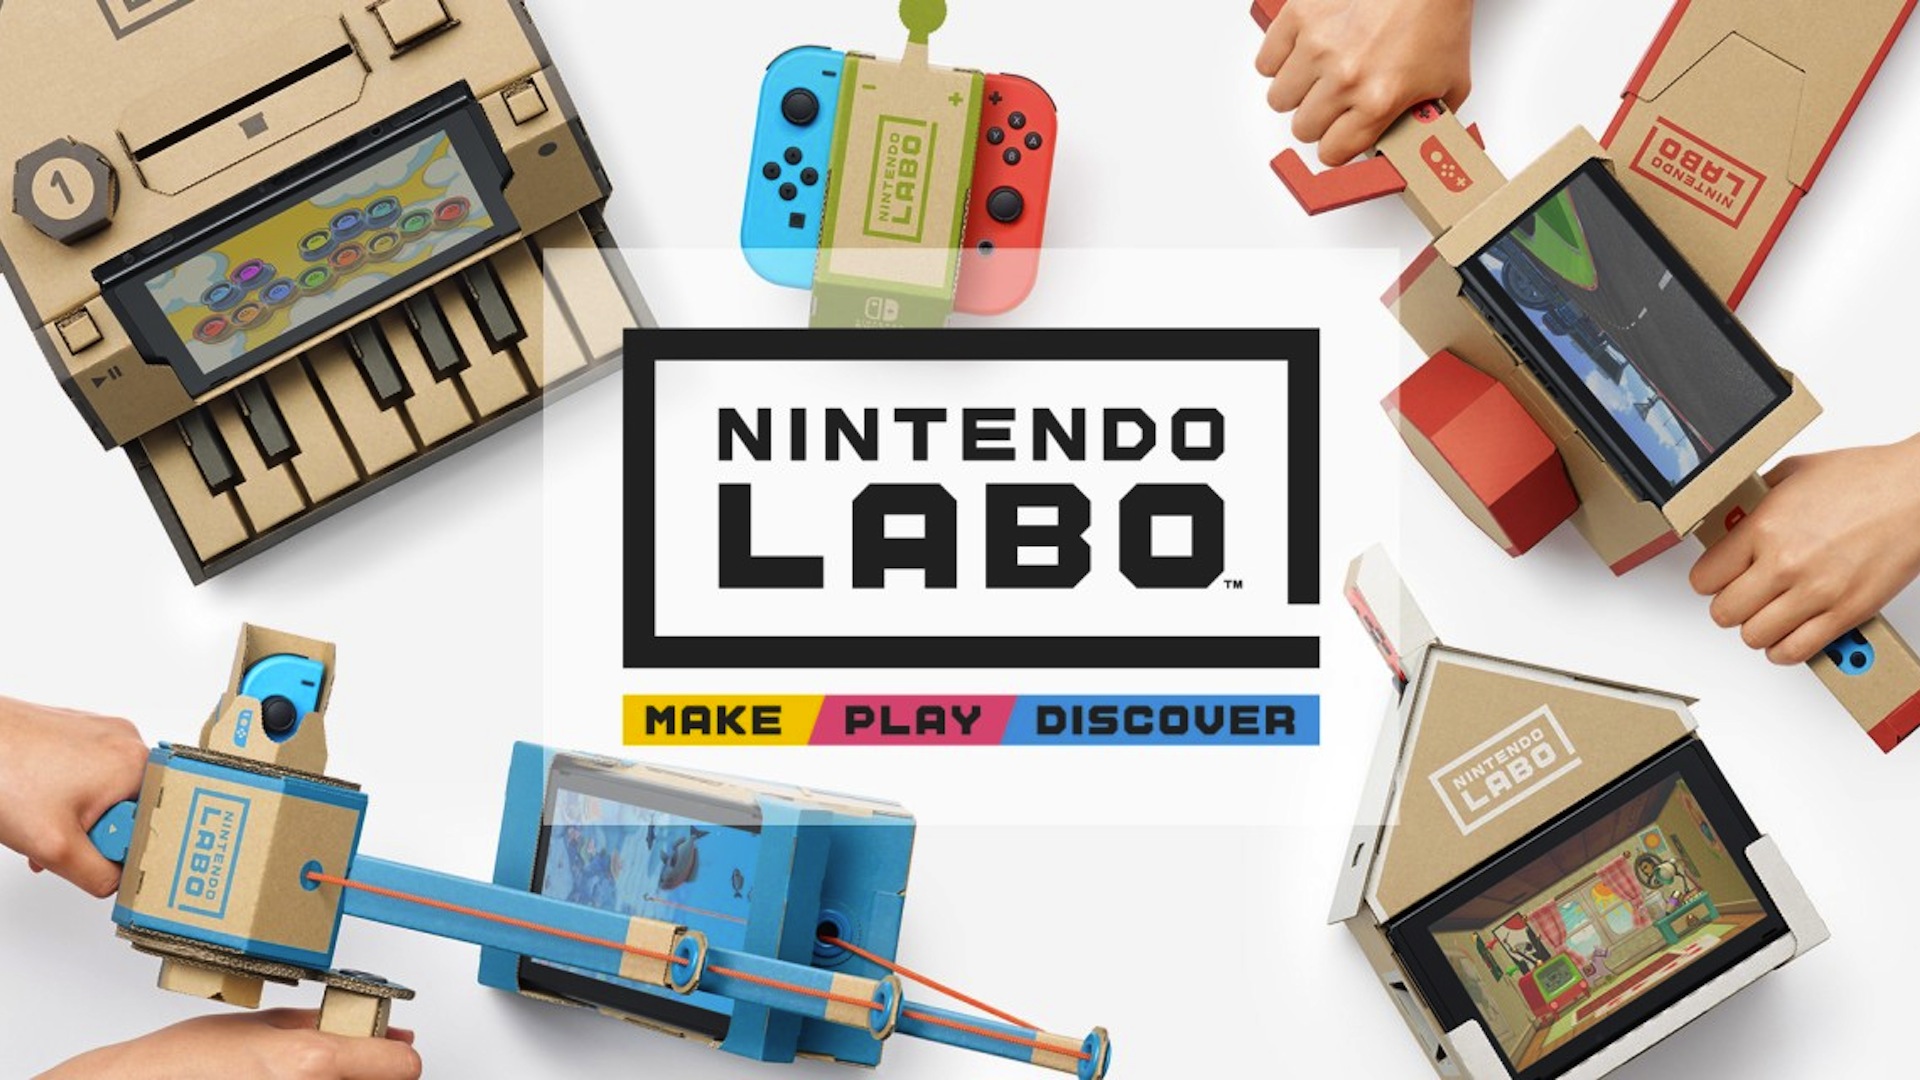 Nintendo-Switch-Labo-Piano-cars-fishing-robot-moto-download-stl-file-DIY-kits-3D-printed-customised-toy-con-cardboards-printer3d-one.jpg